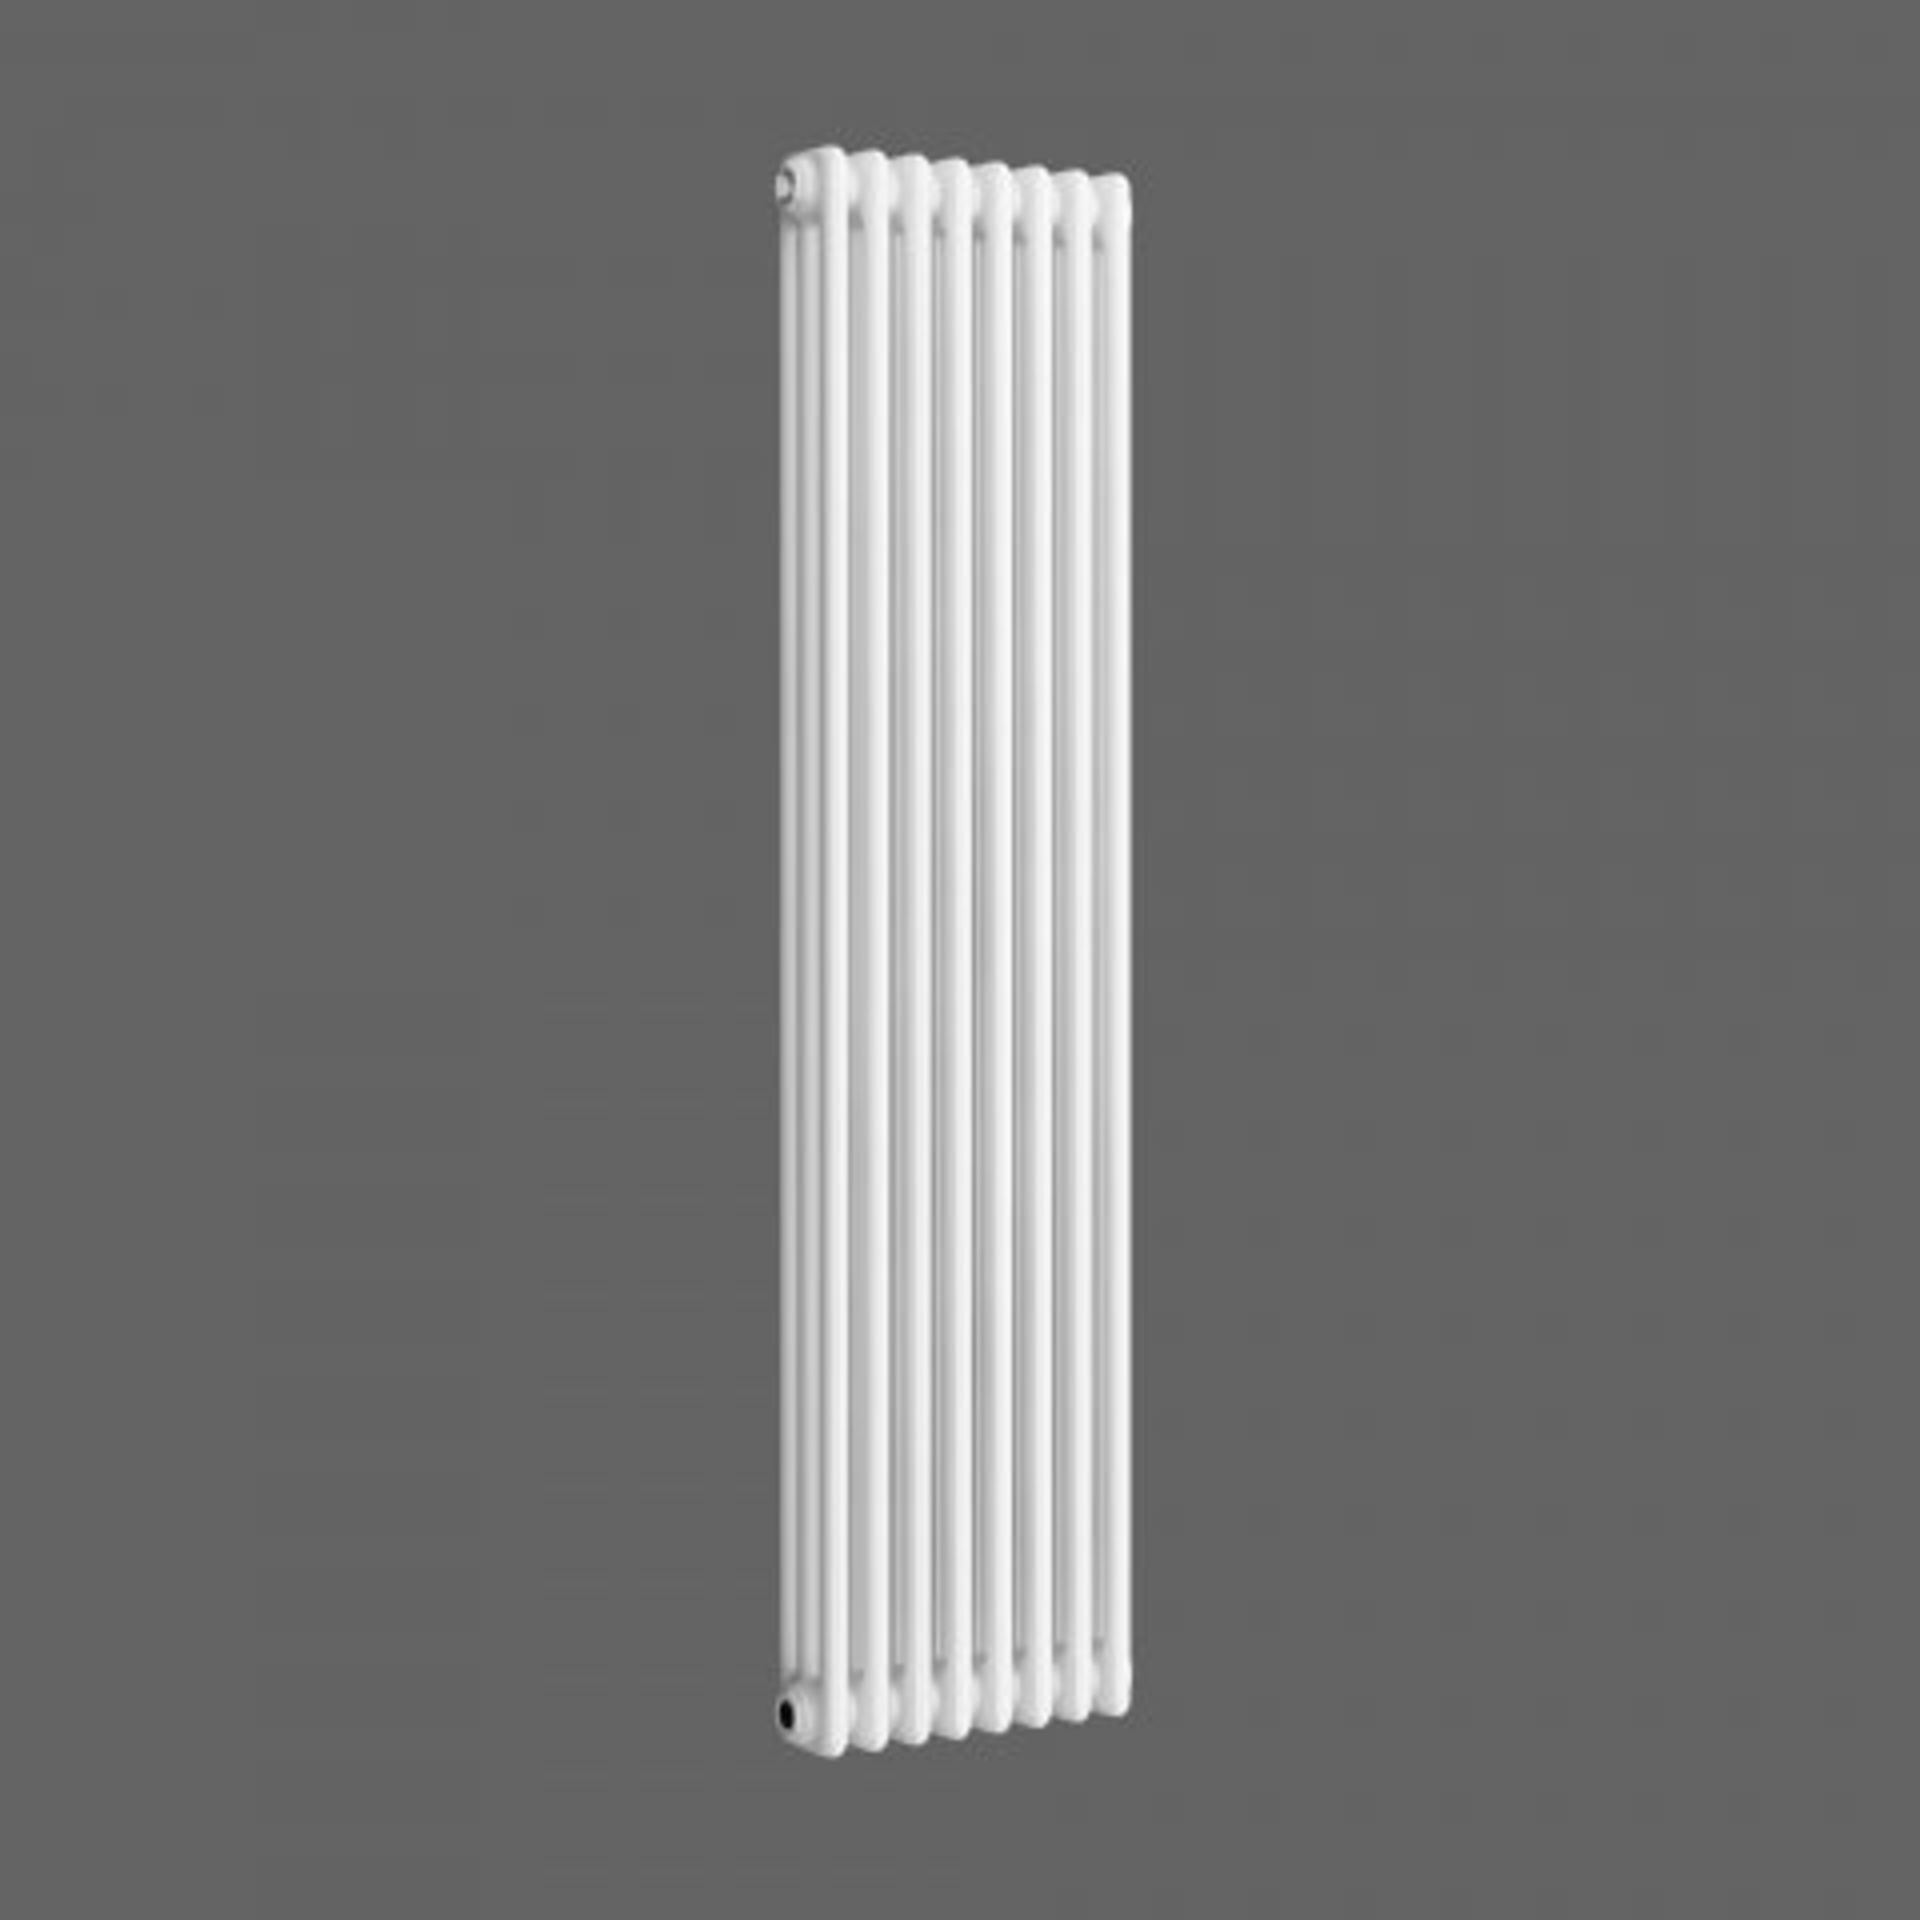 (P247) 1500x380mm White Triple Panel Vertical Colosseum Traditional Radiator. RRP £371.99. Classic - Image 3 of 5